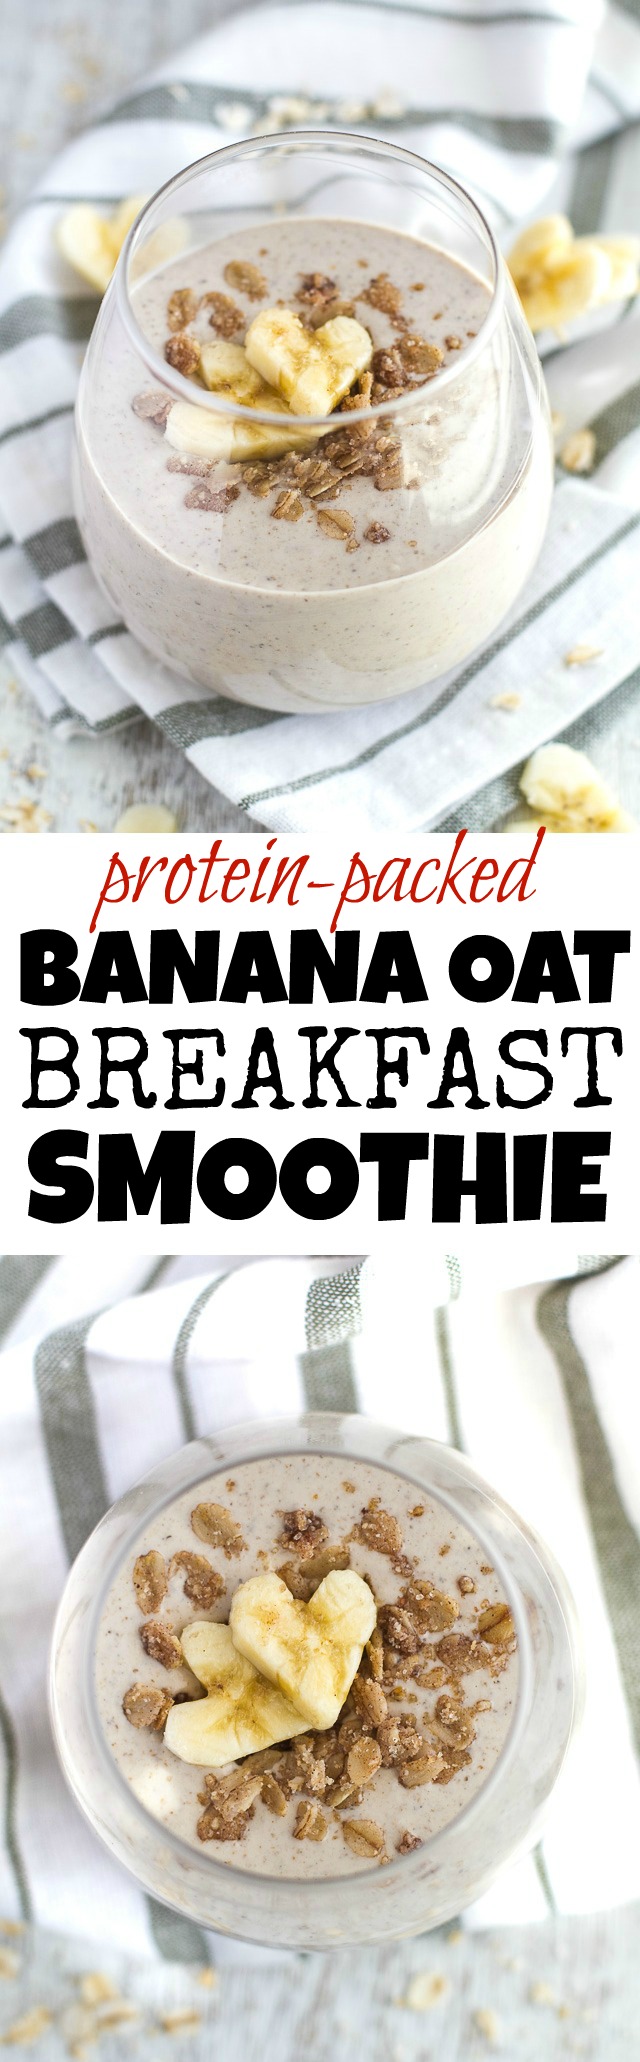 Banana Oat Breakfast Smoothie - 20g of whole food protein in a deliciously creamy smoothie that's guaranteed to keep you satisfied all morning! | runningwithspoons.com #recipe #healthy